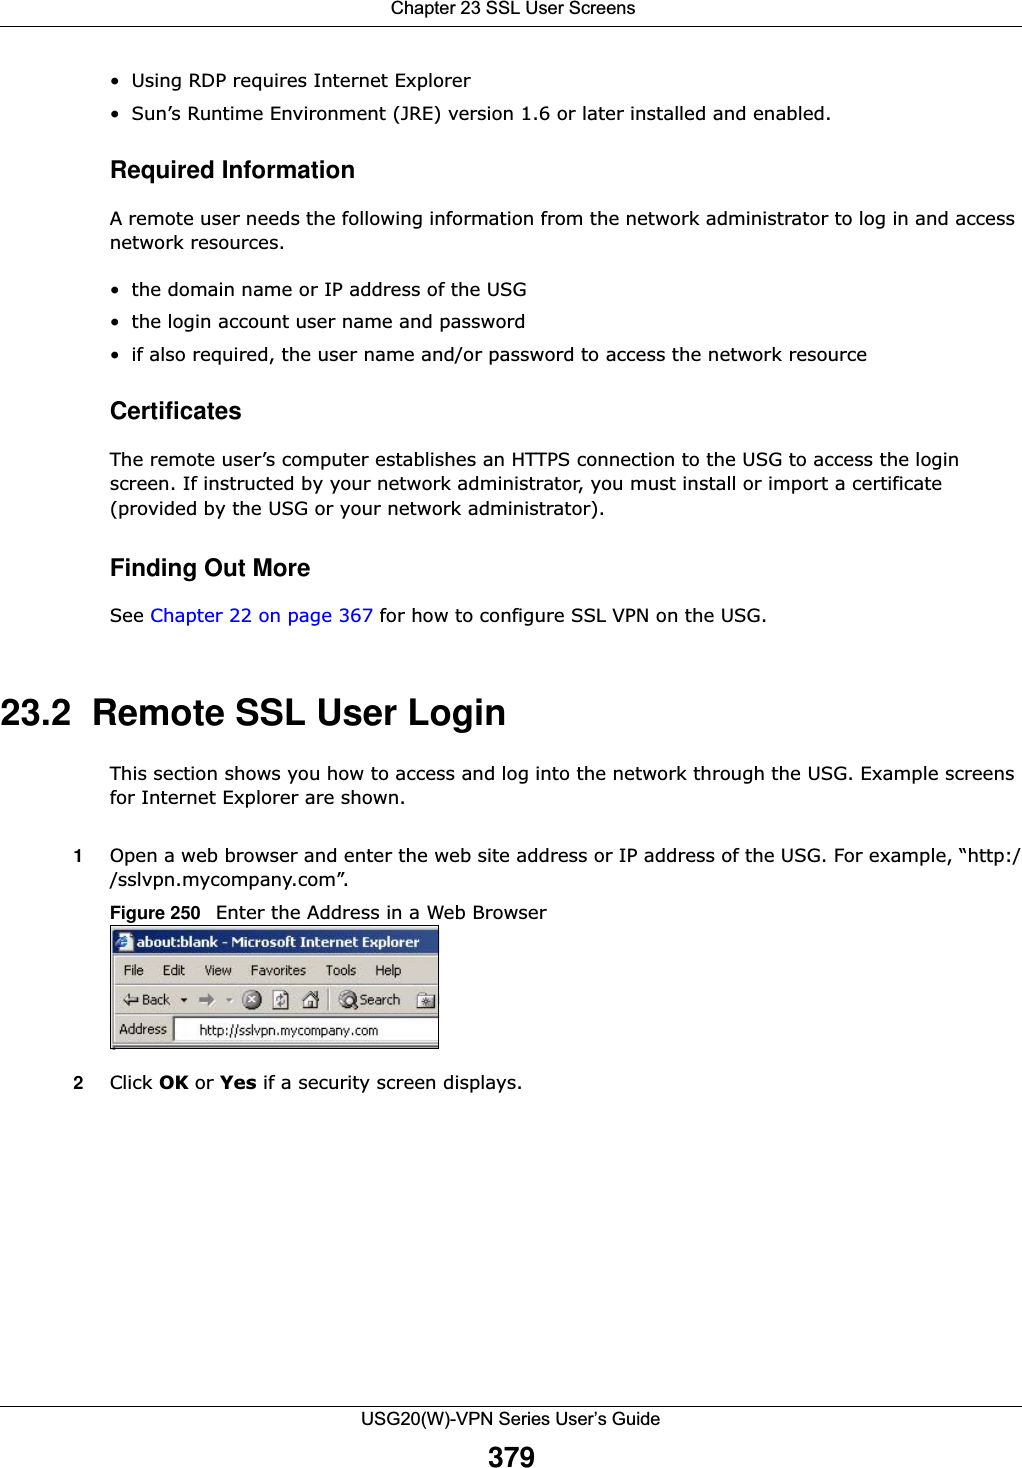  Chapter 23 SSL User ScreensUSG20(W)-VPN Series User’s Guide379• Using RDP requires Internet Explorer• Sun’s Runtime Environment (JRE) version 1.6 or later installed and enabled.Required InformationA remote user needs the following information from the network administrator to log in and access network resources. • the domain name or IP address of the USG• the login account user name and password• if also required, the user name and/or password to access the network resourceCertificatesThe remote user’s computer establishes an HTTPS connection to the USG to access the login screen. If instructed by your network administrator, you must install or import a certificate (provided by the USG or your network administrator).Finding Out MoreSee Chapter 22 on page 367 for how to configure SSL VPN on the USG.23.2  Remote SSL User LoginThis section shows you how to access and log into the network through the USG. Example screens for Internet Explorer are shown. 1Open a web browser and enter the web site address or IP address of the USG. For example, “http://sslvpn.mycompany.com”. Figure 250   Enter the Address in a Web Browser  2Click OK or Yes if a security screen displays. 